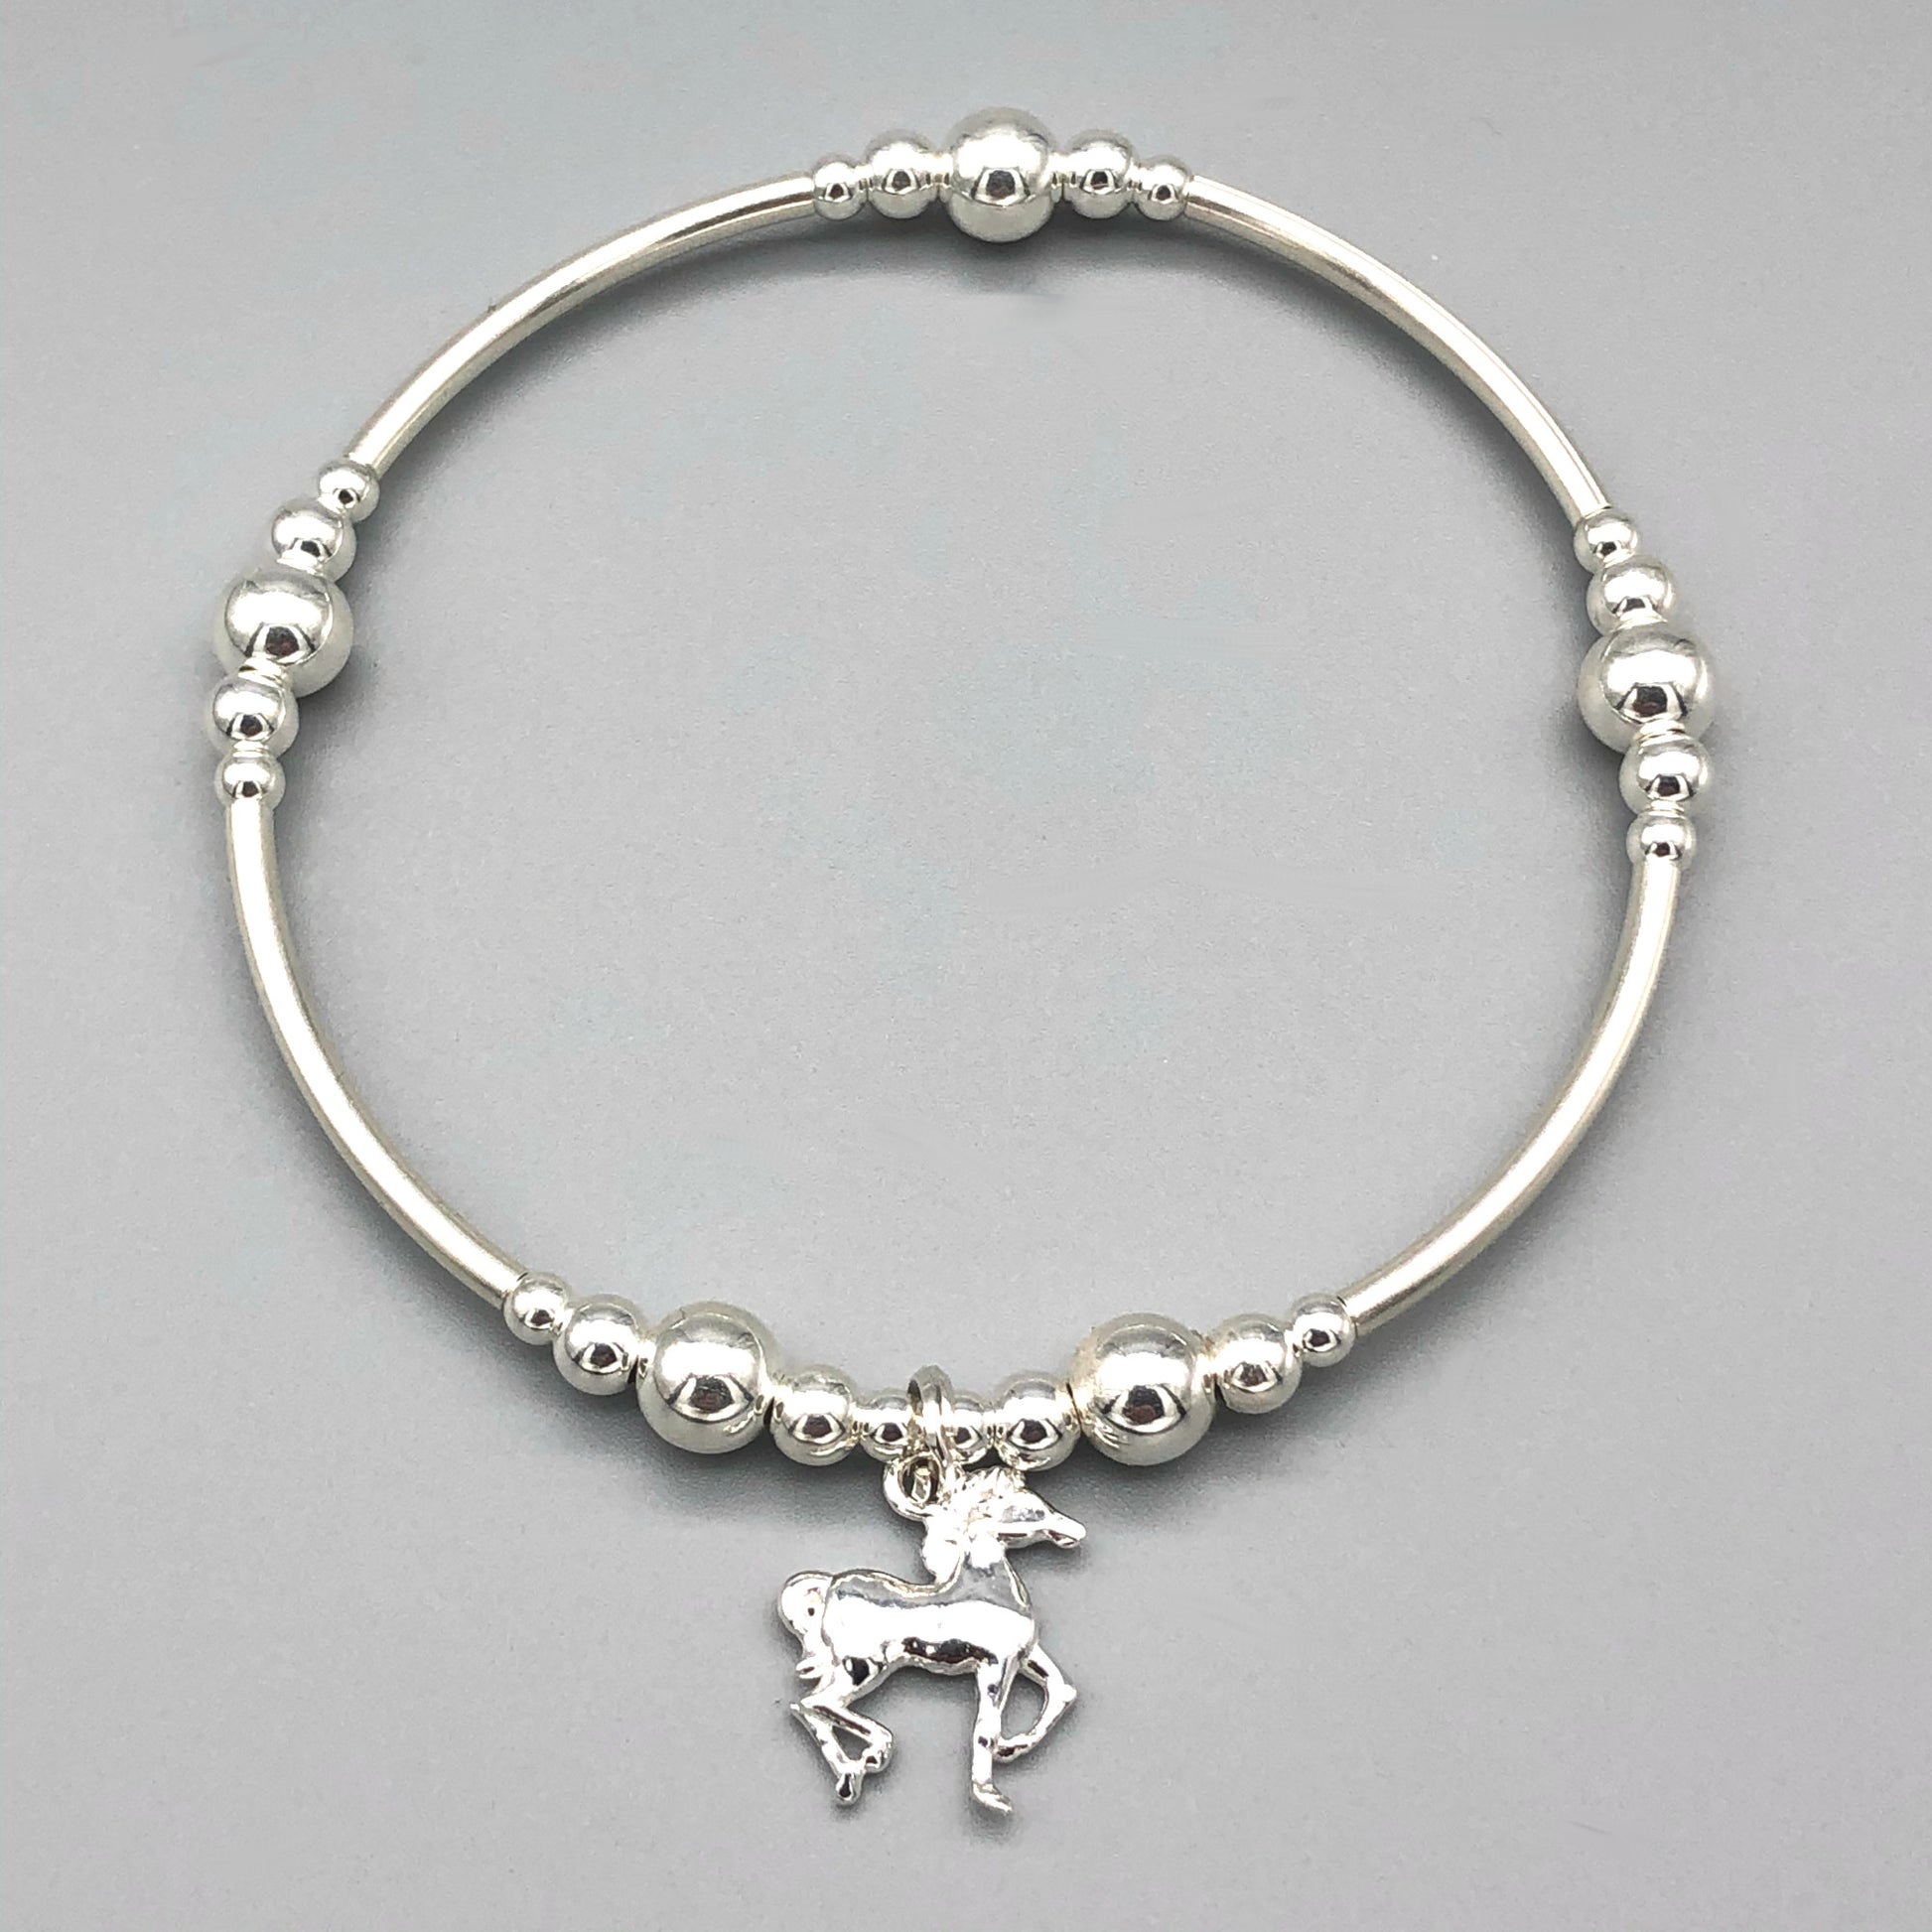 Horse charm sterling silver stacking bracelet for her by My Silver Wish